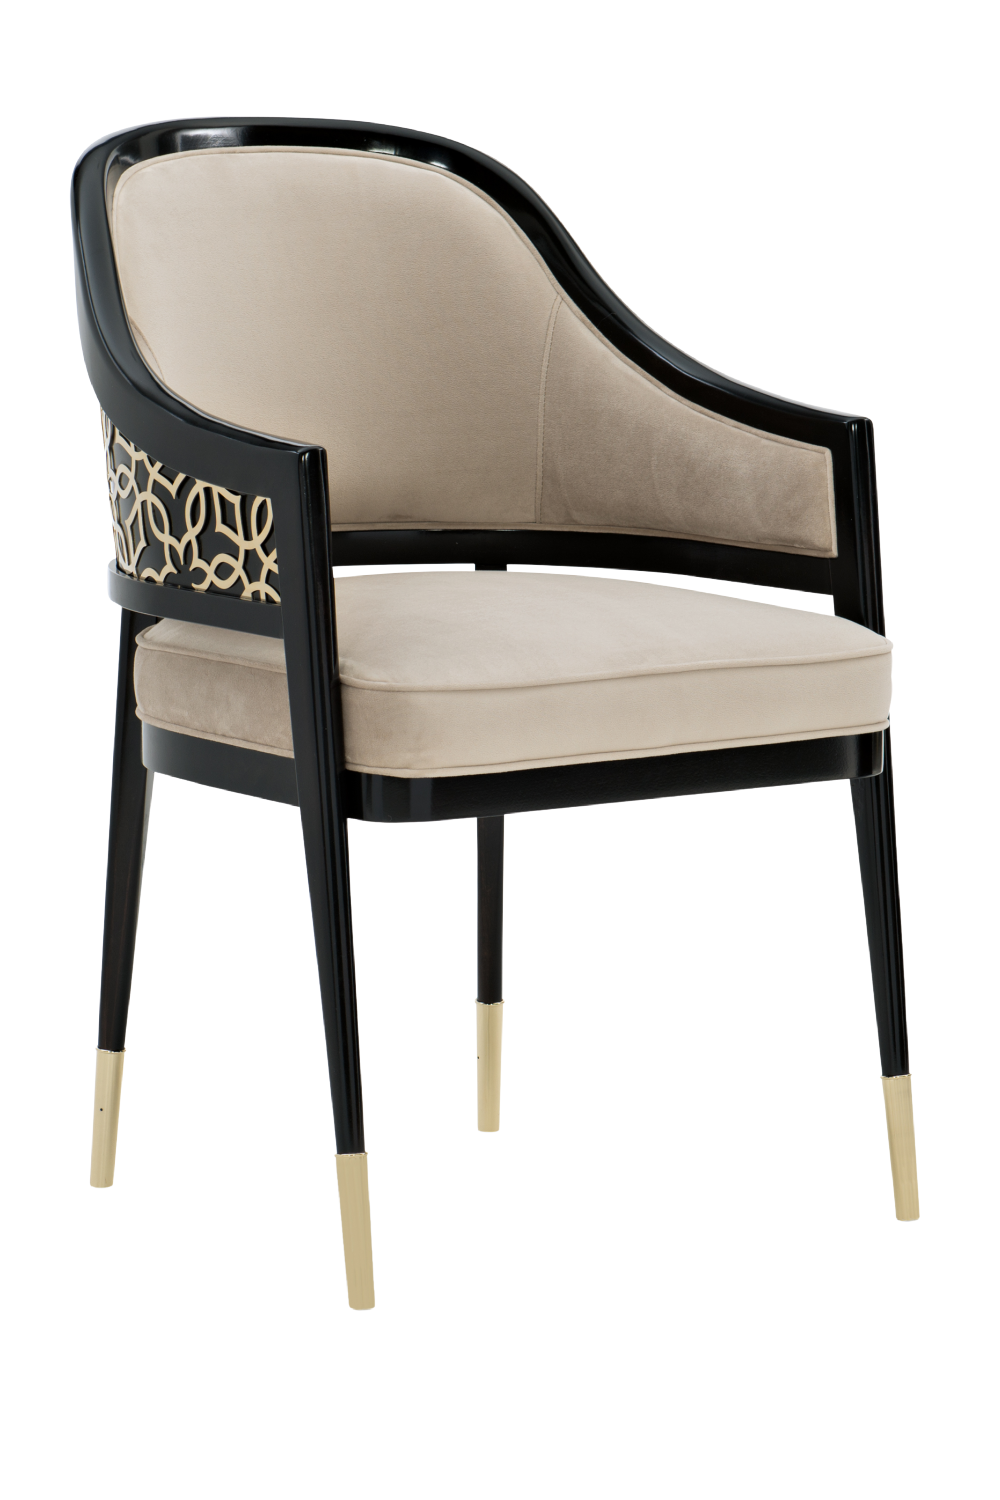 Arabesque Fretwork Dining Chair | Caracole Club Member At The Table | Oroa.com